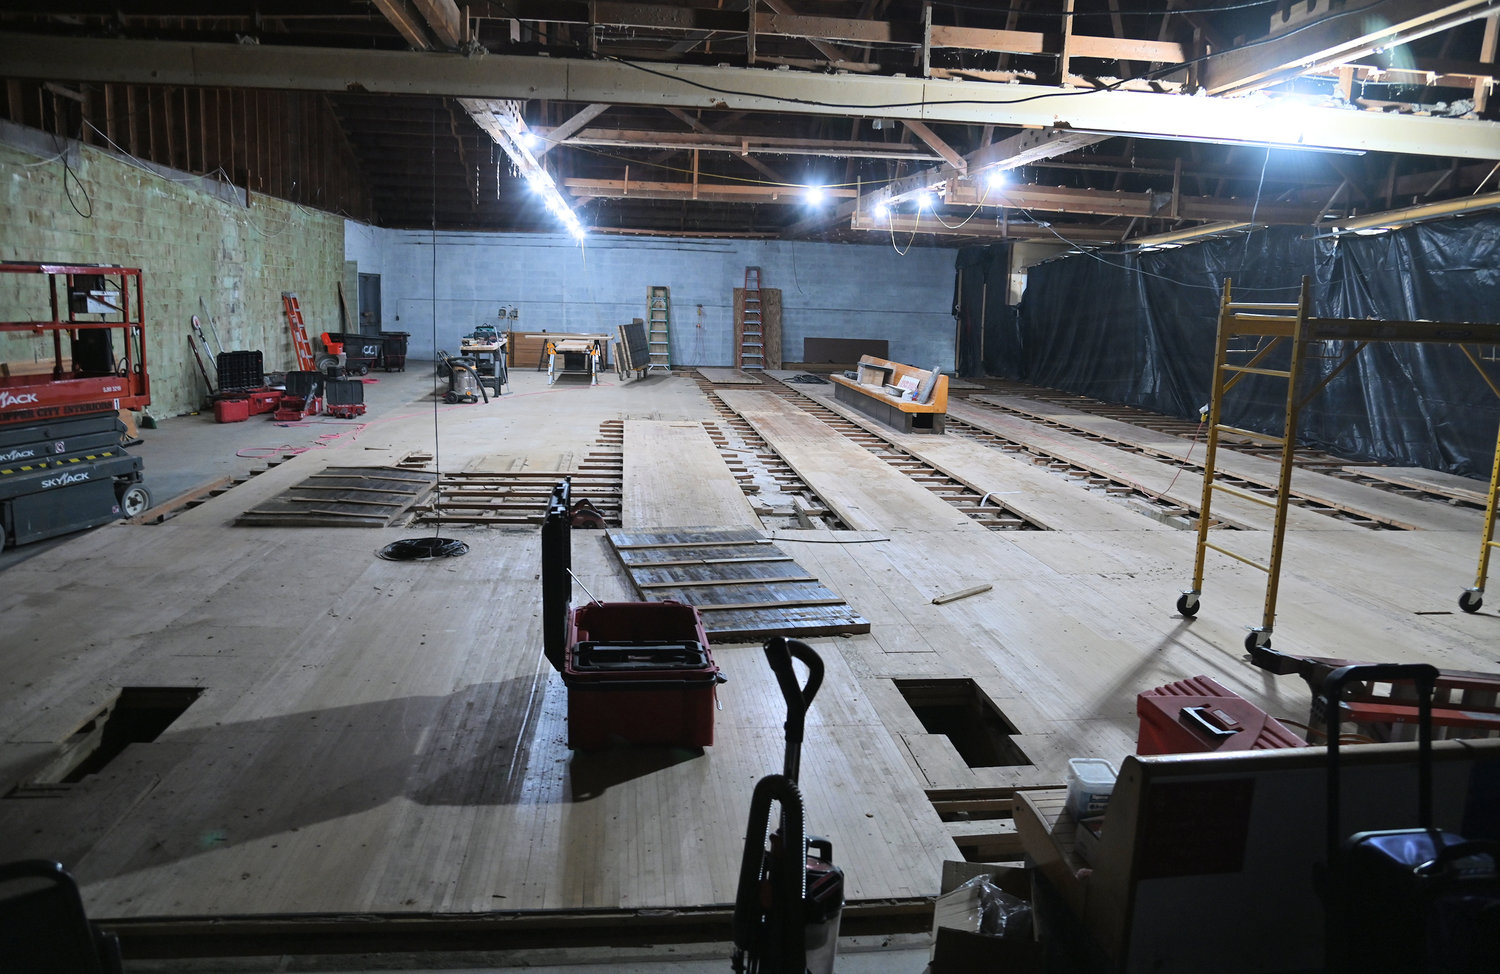 Behind the plastic, work continues on the removal of the lanes at King Pin Lanes to make way for a new arcade.